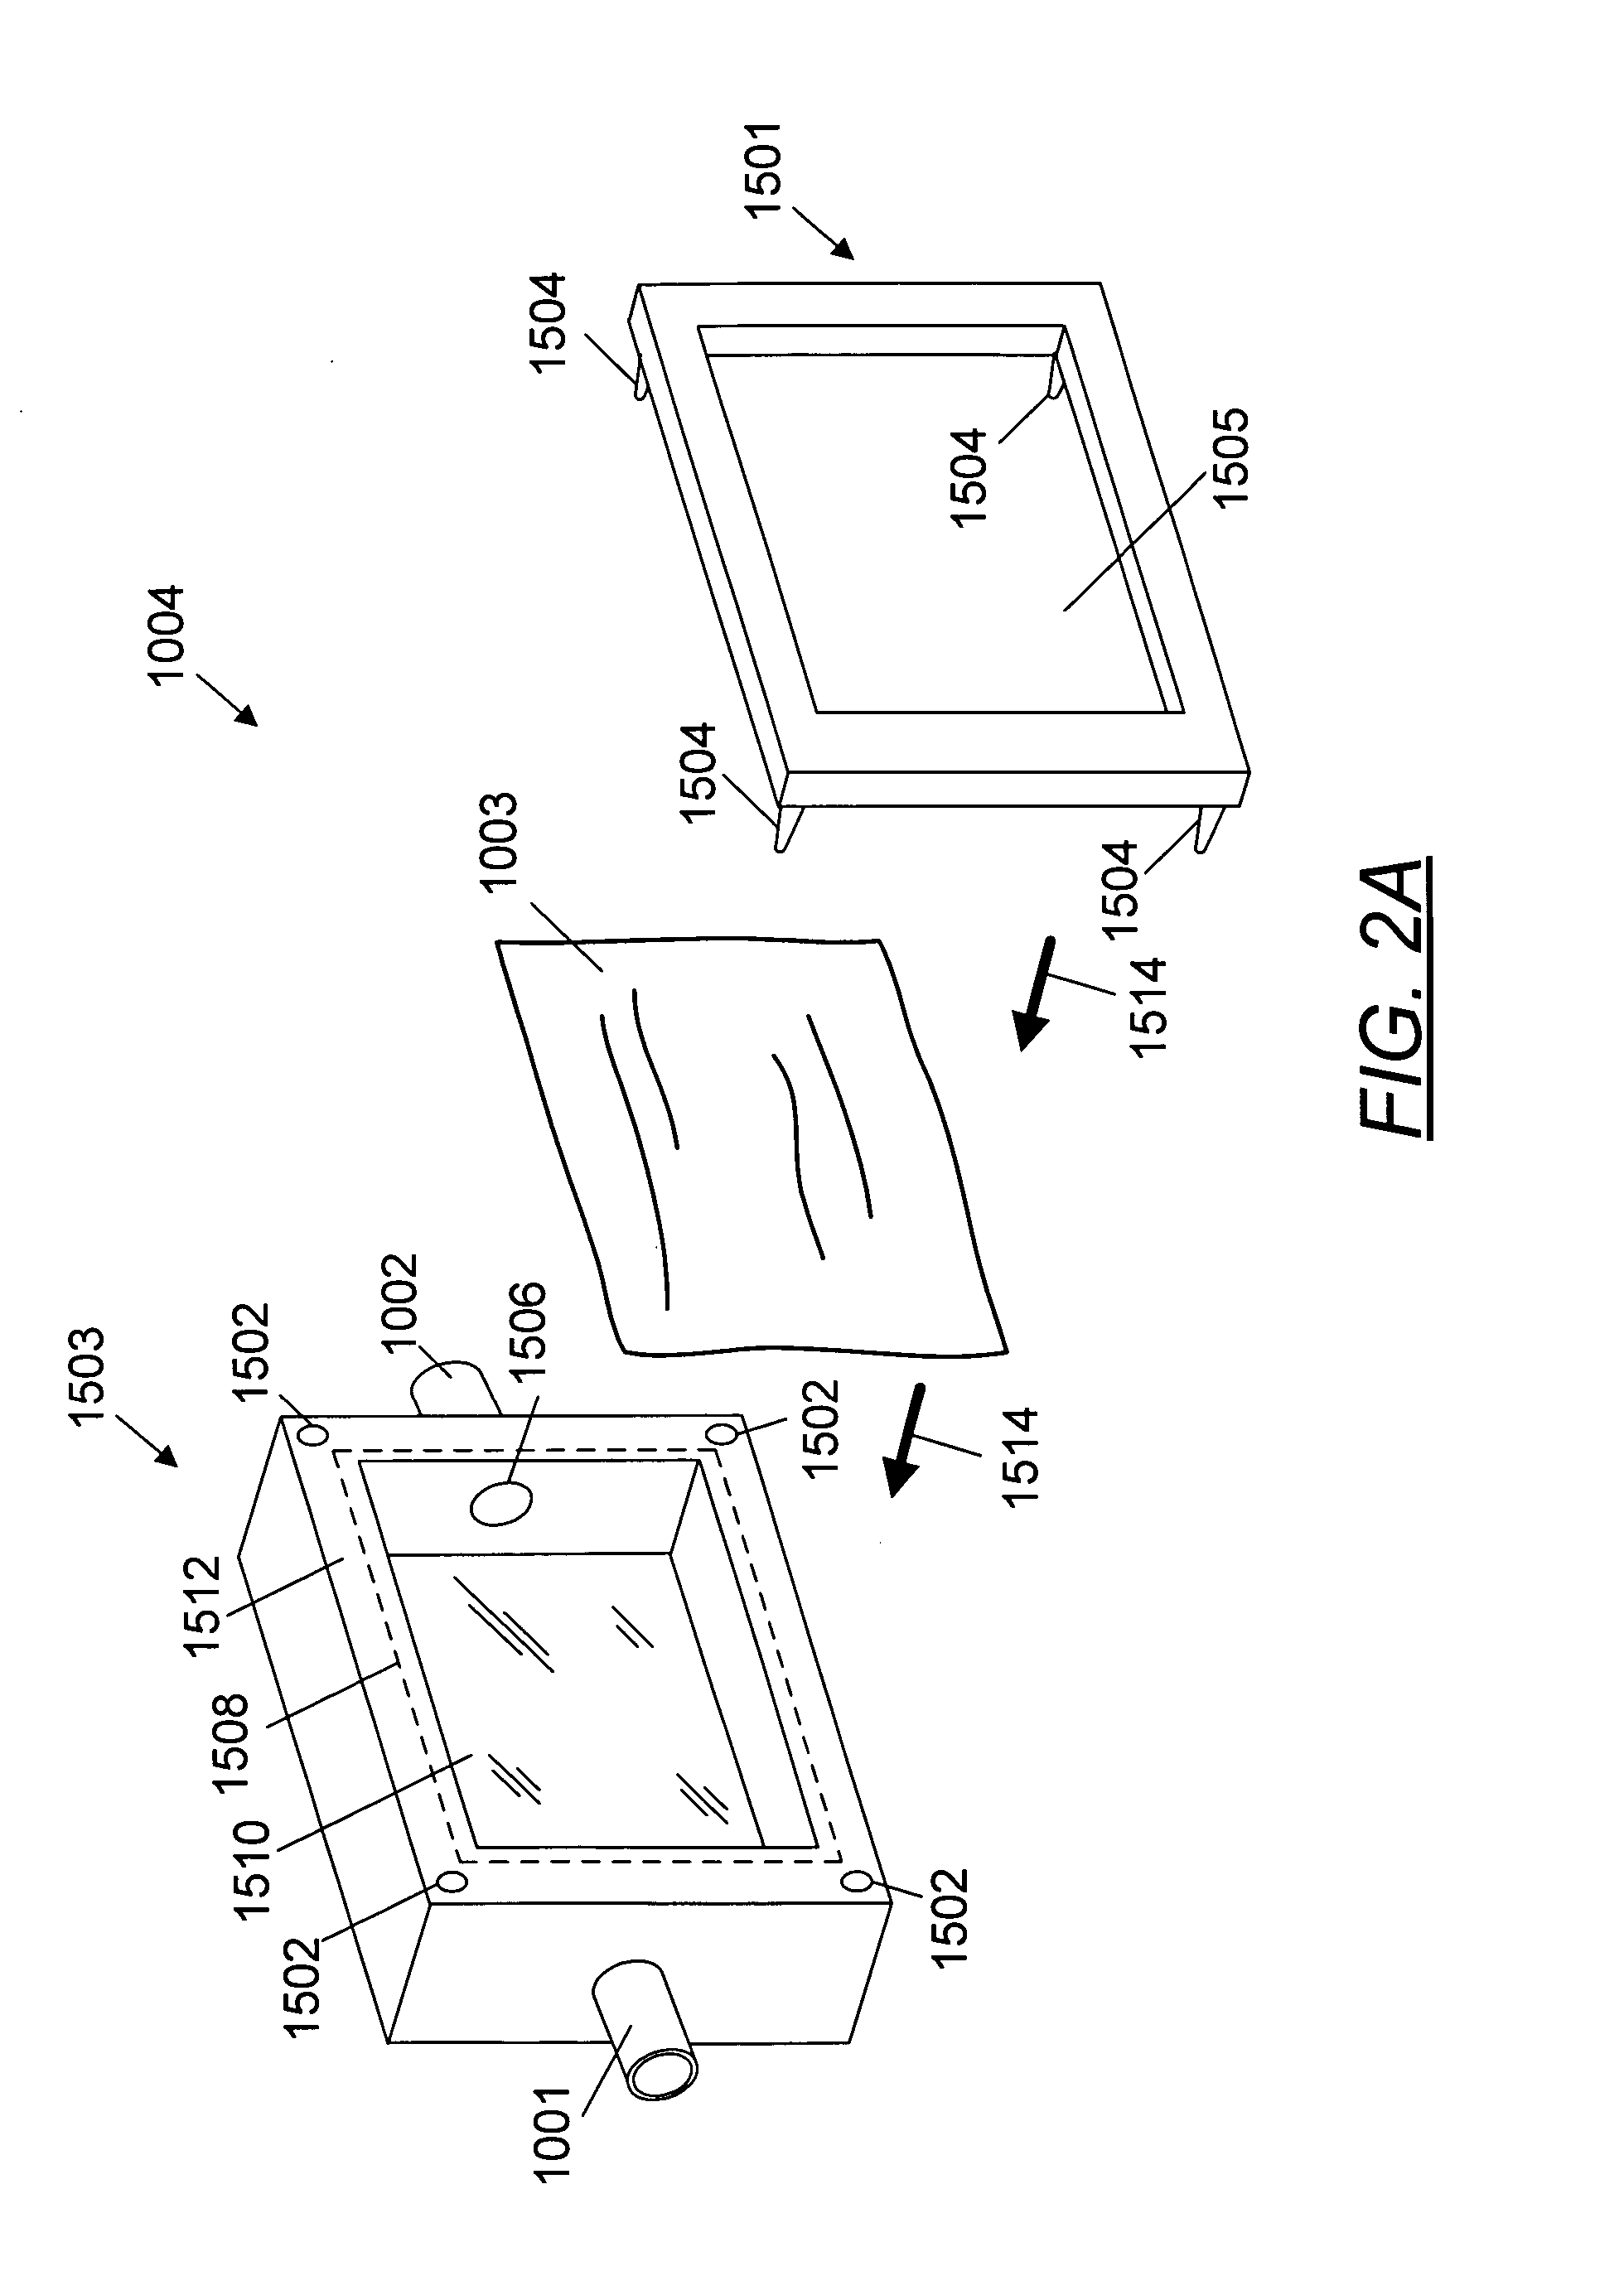 Oral respirator device and method for mask-free filtering of particulates from breathed air